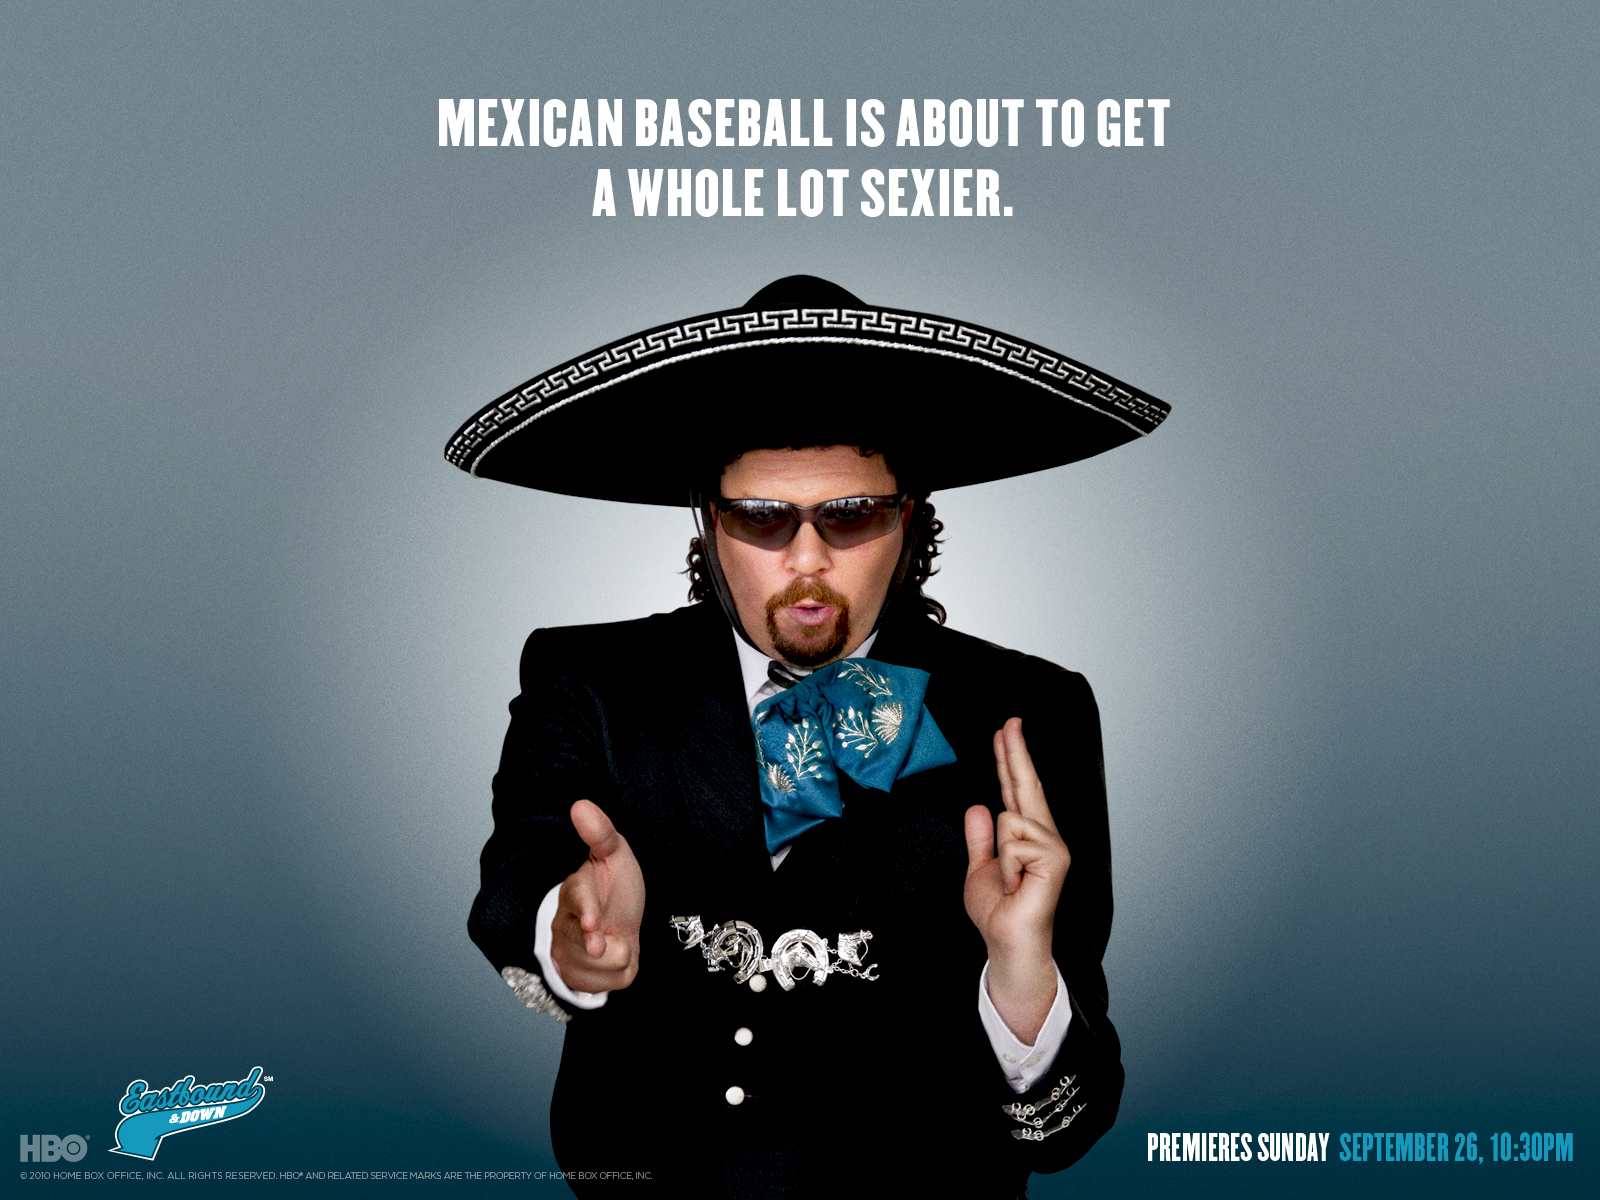 Kenny Powers Quotes. QuotesGram